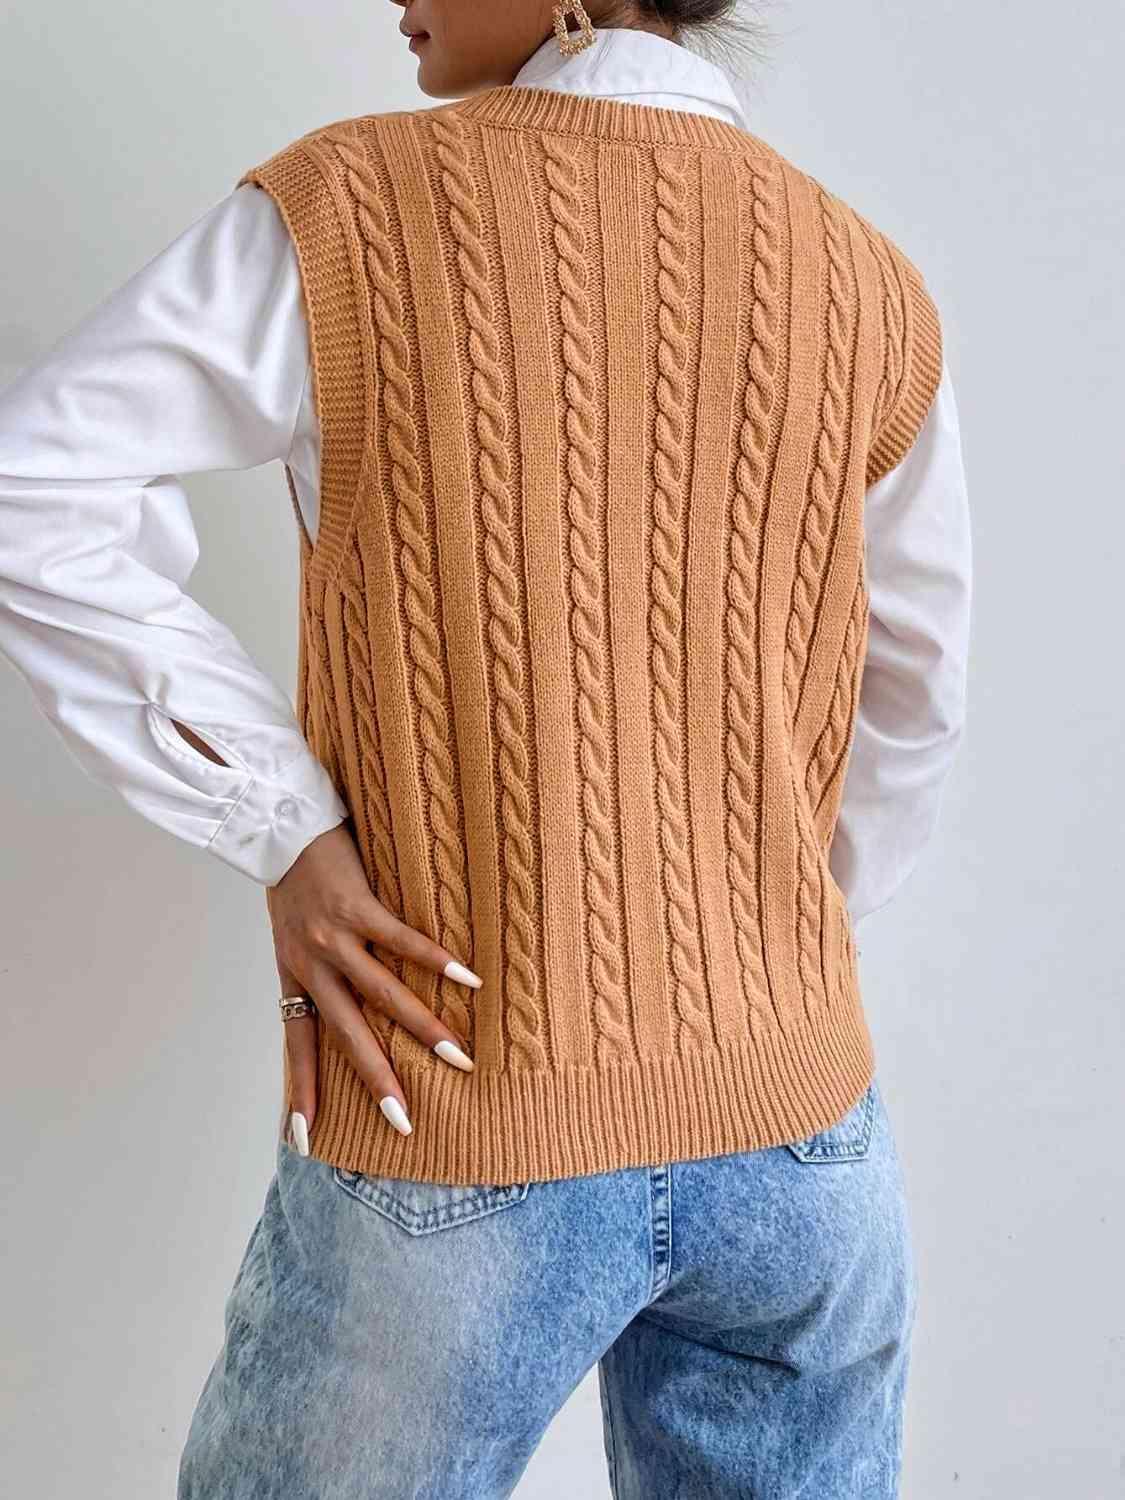 All Time Chic Sleeveless Cable Knit Sweater Vest-MXSTUDIO.COM